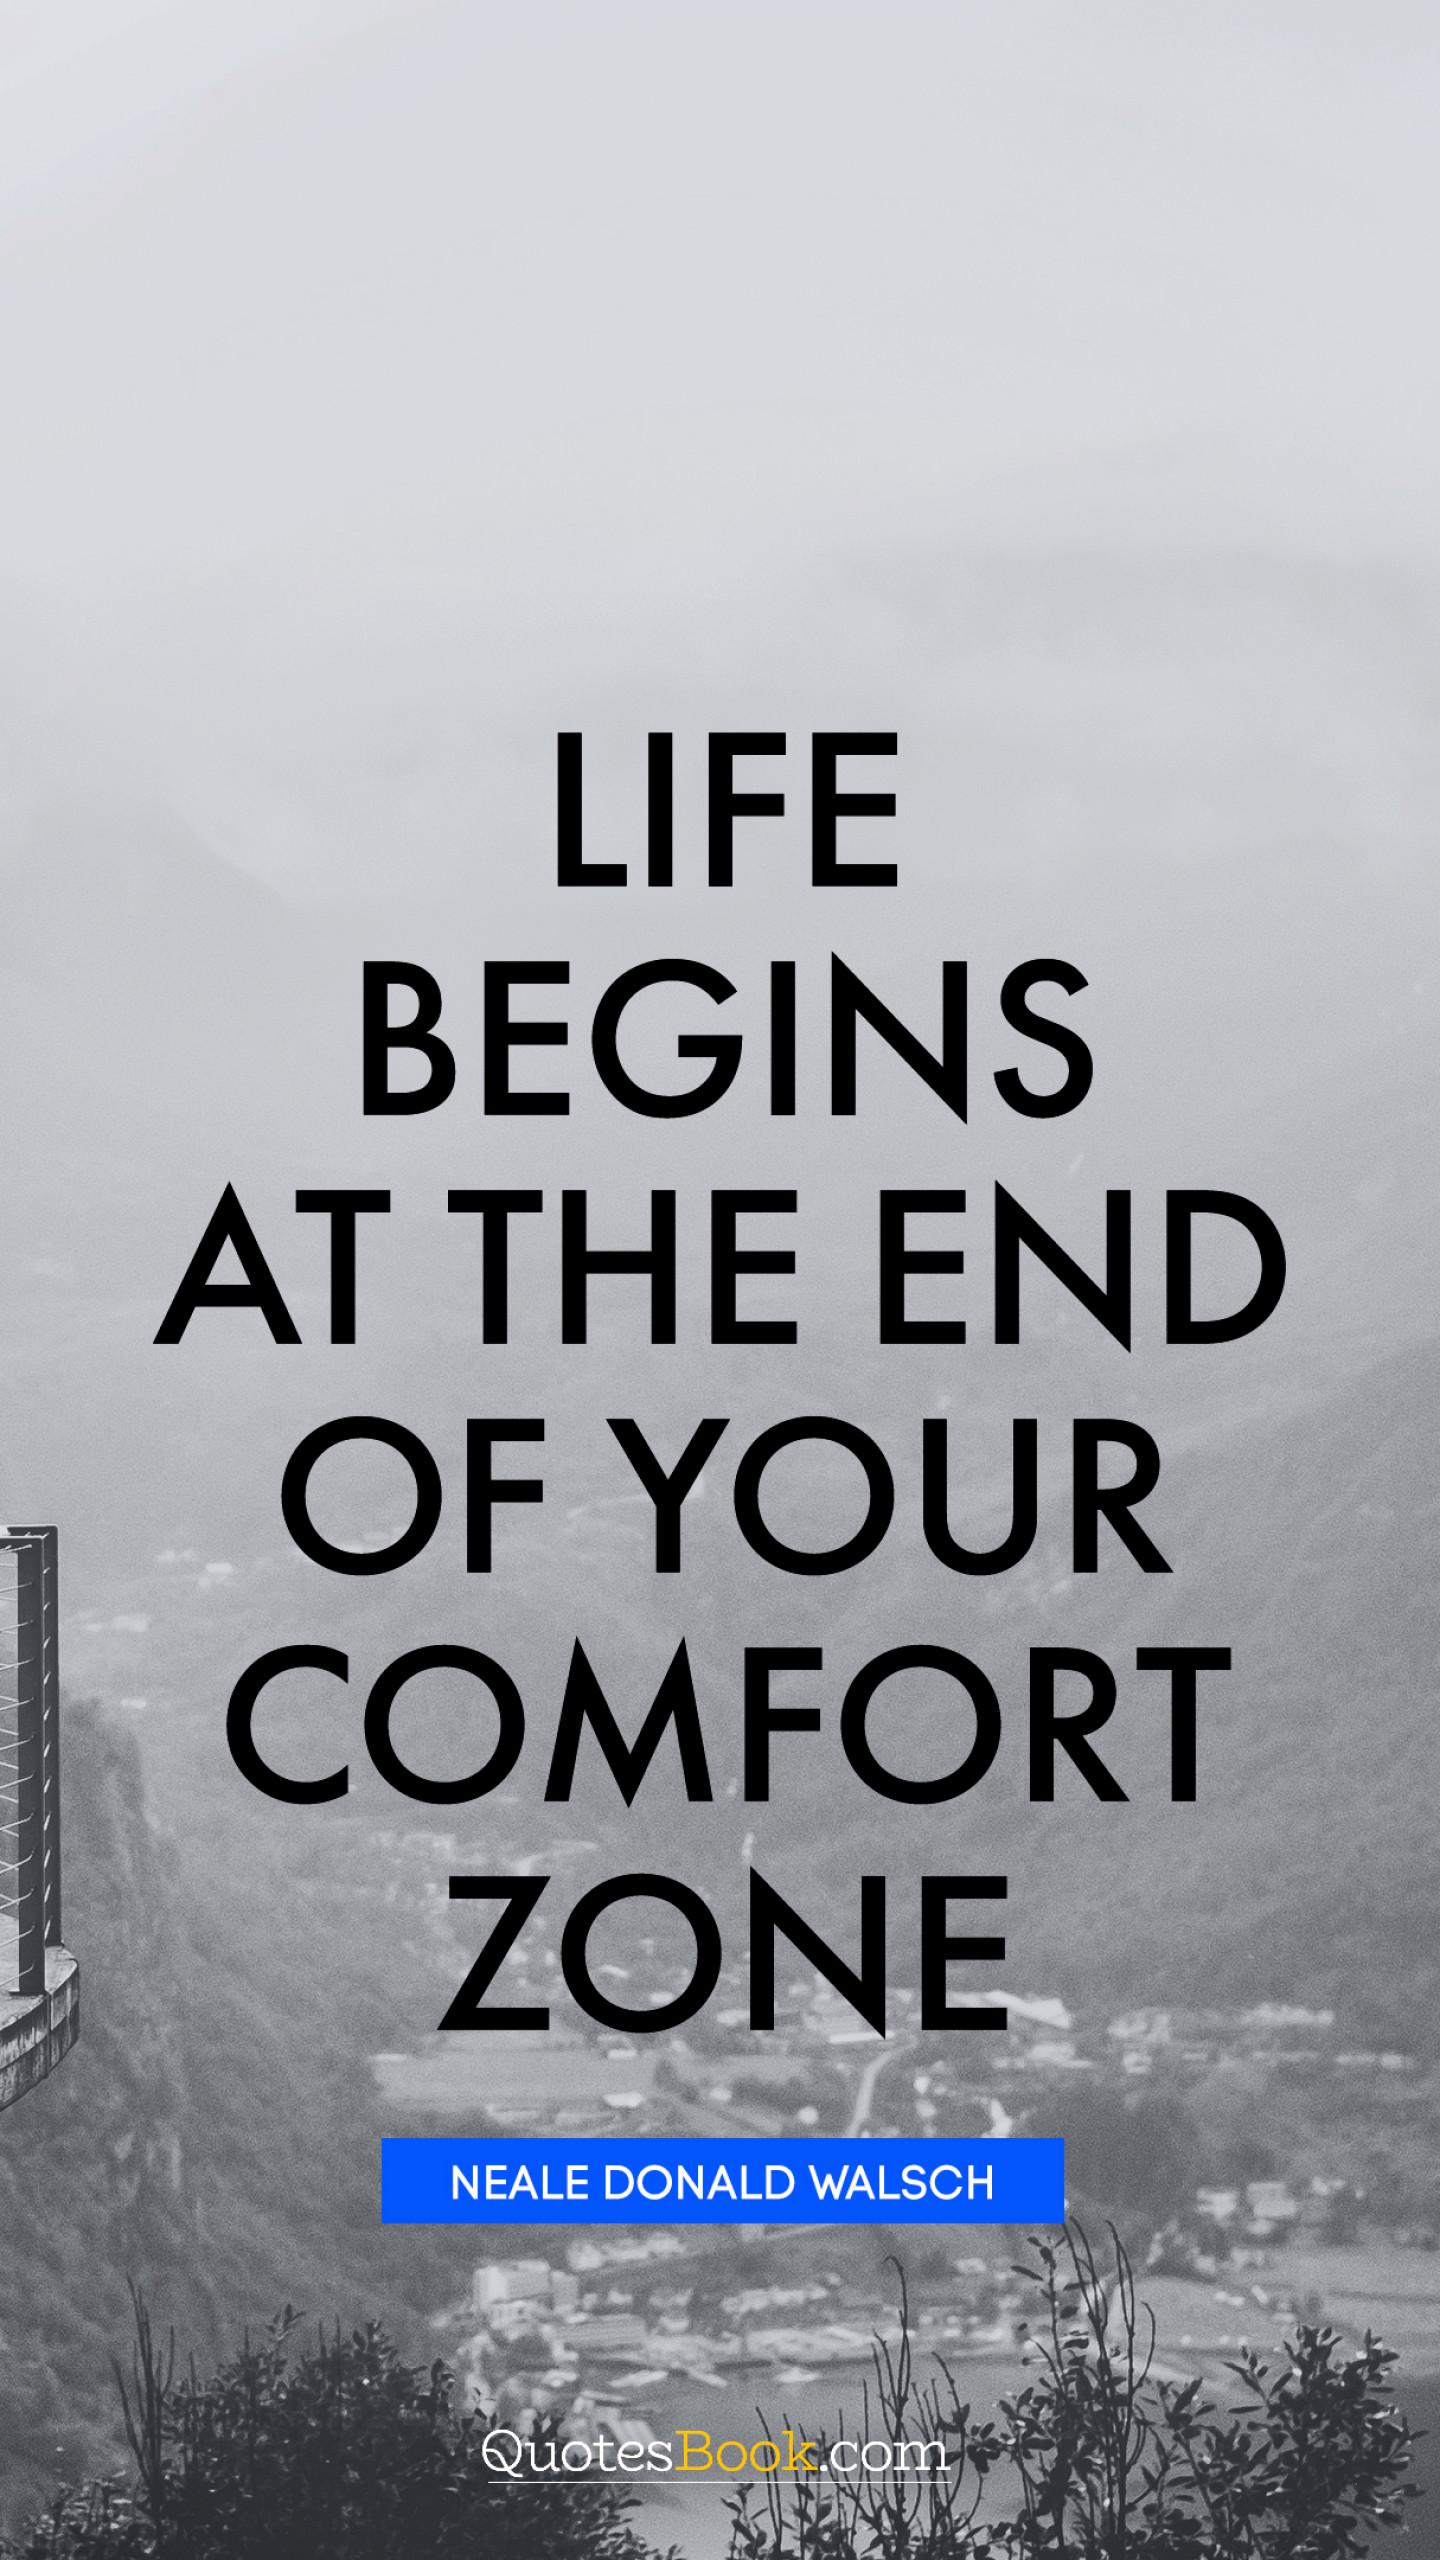 Life begins at the end of your comfort zone. - Quote by Neale Donald